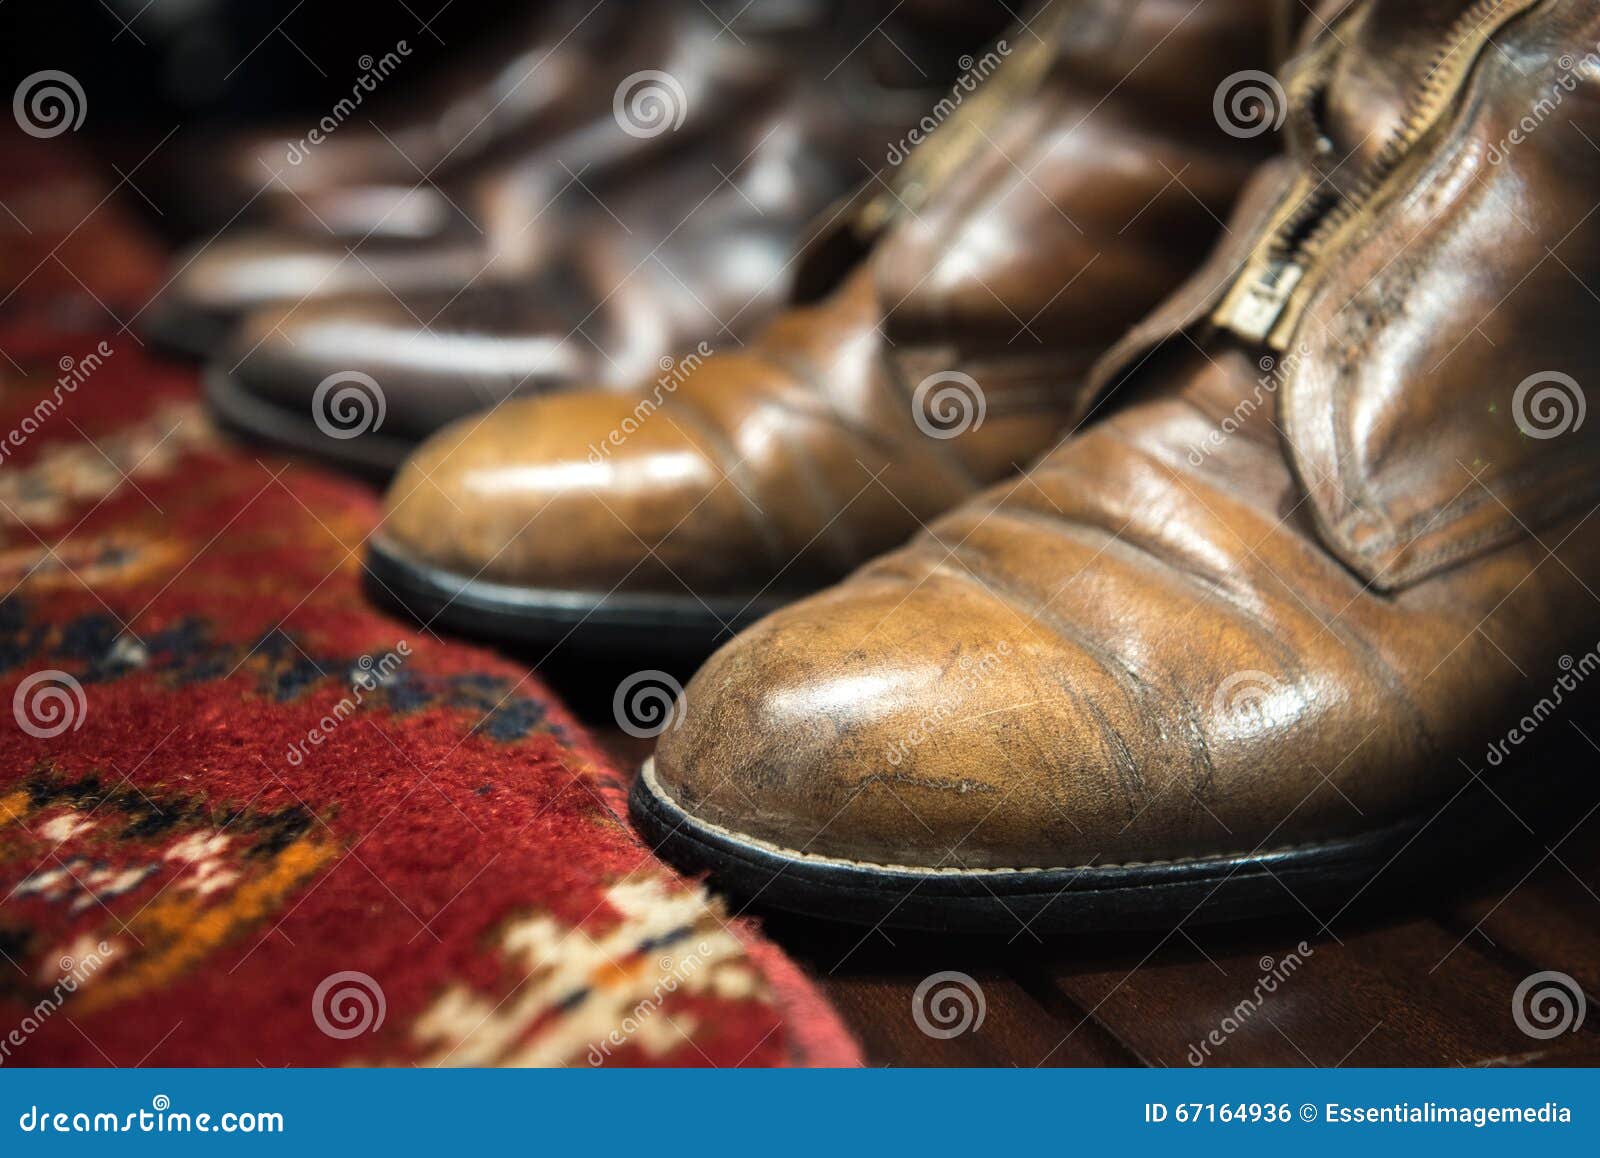 Leather Boots and Carpet stock photo. Image of shoes - 67164936